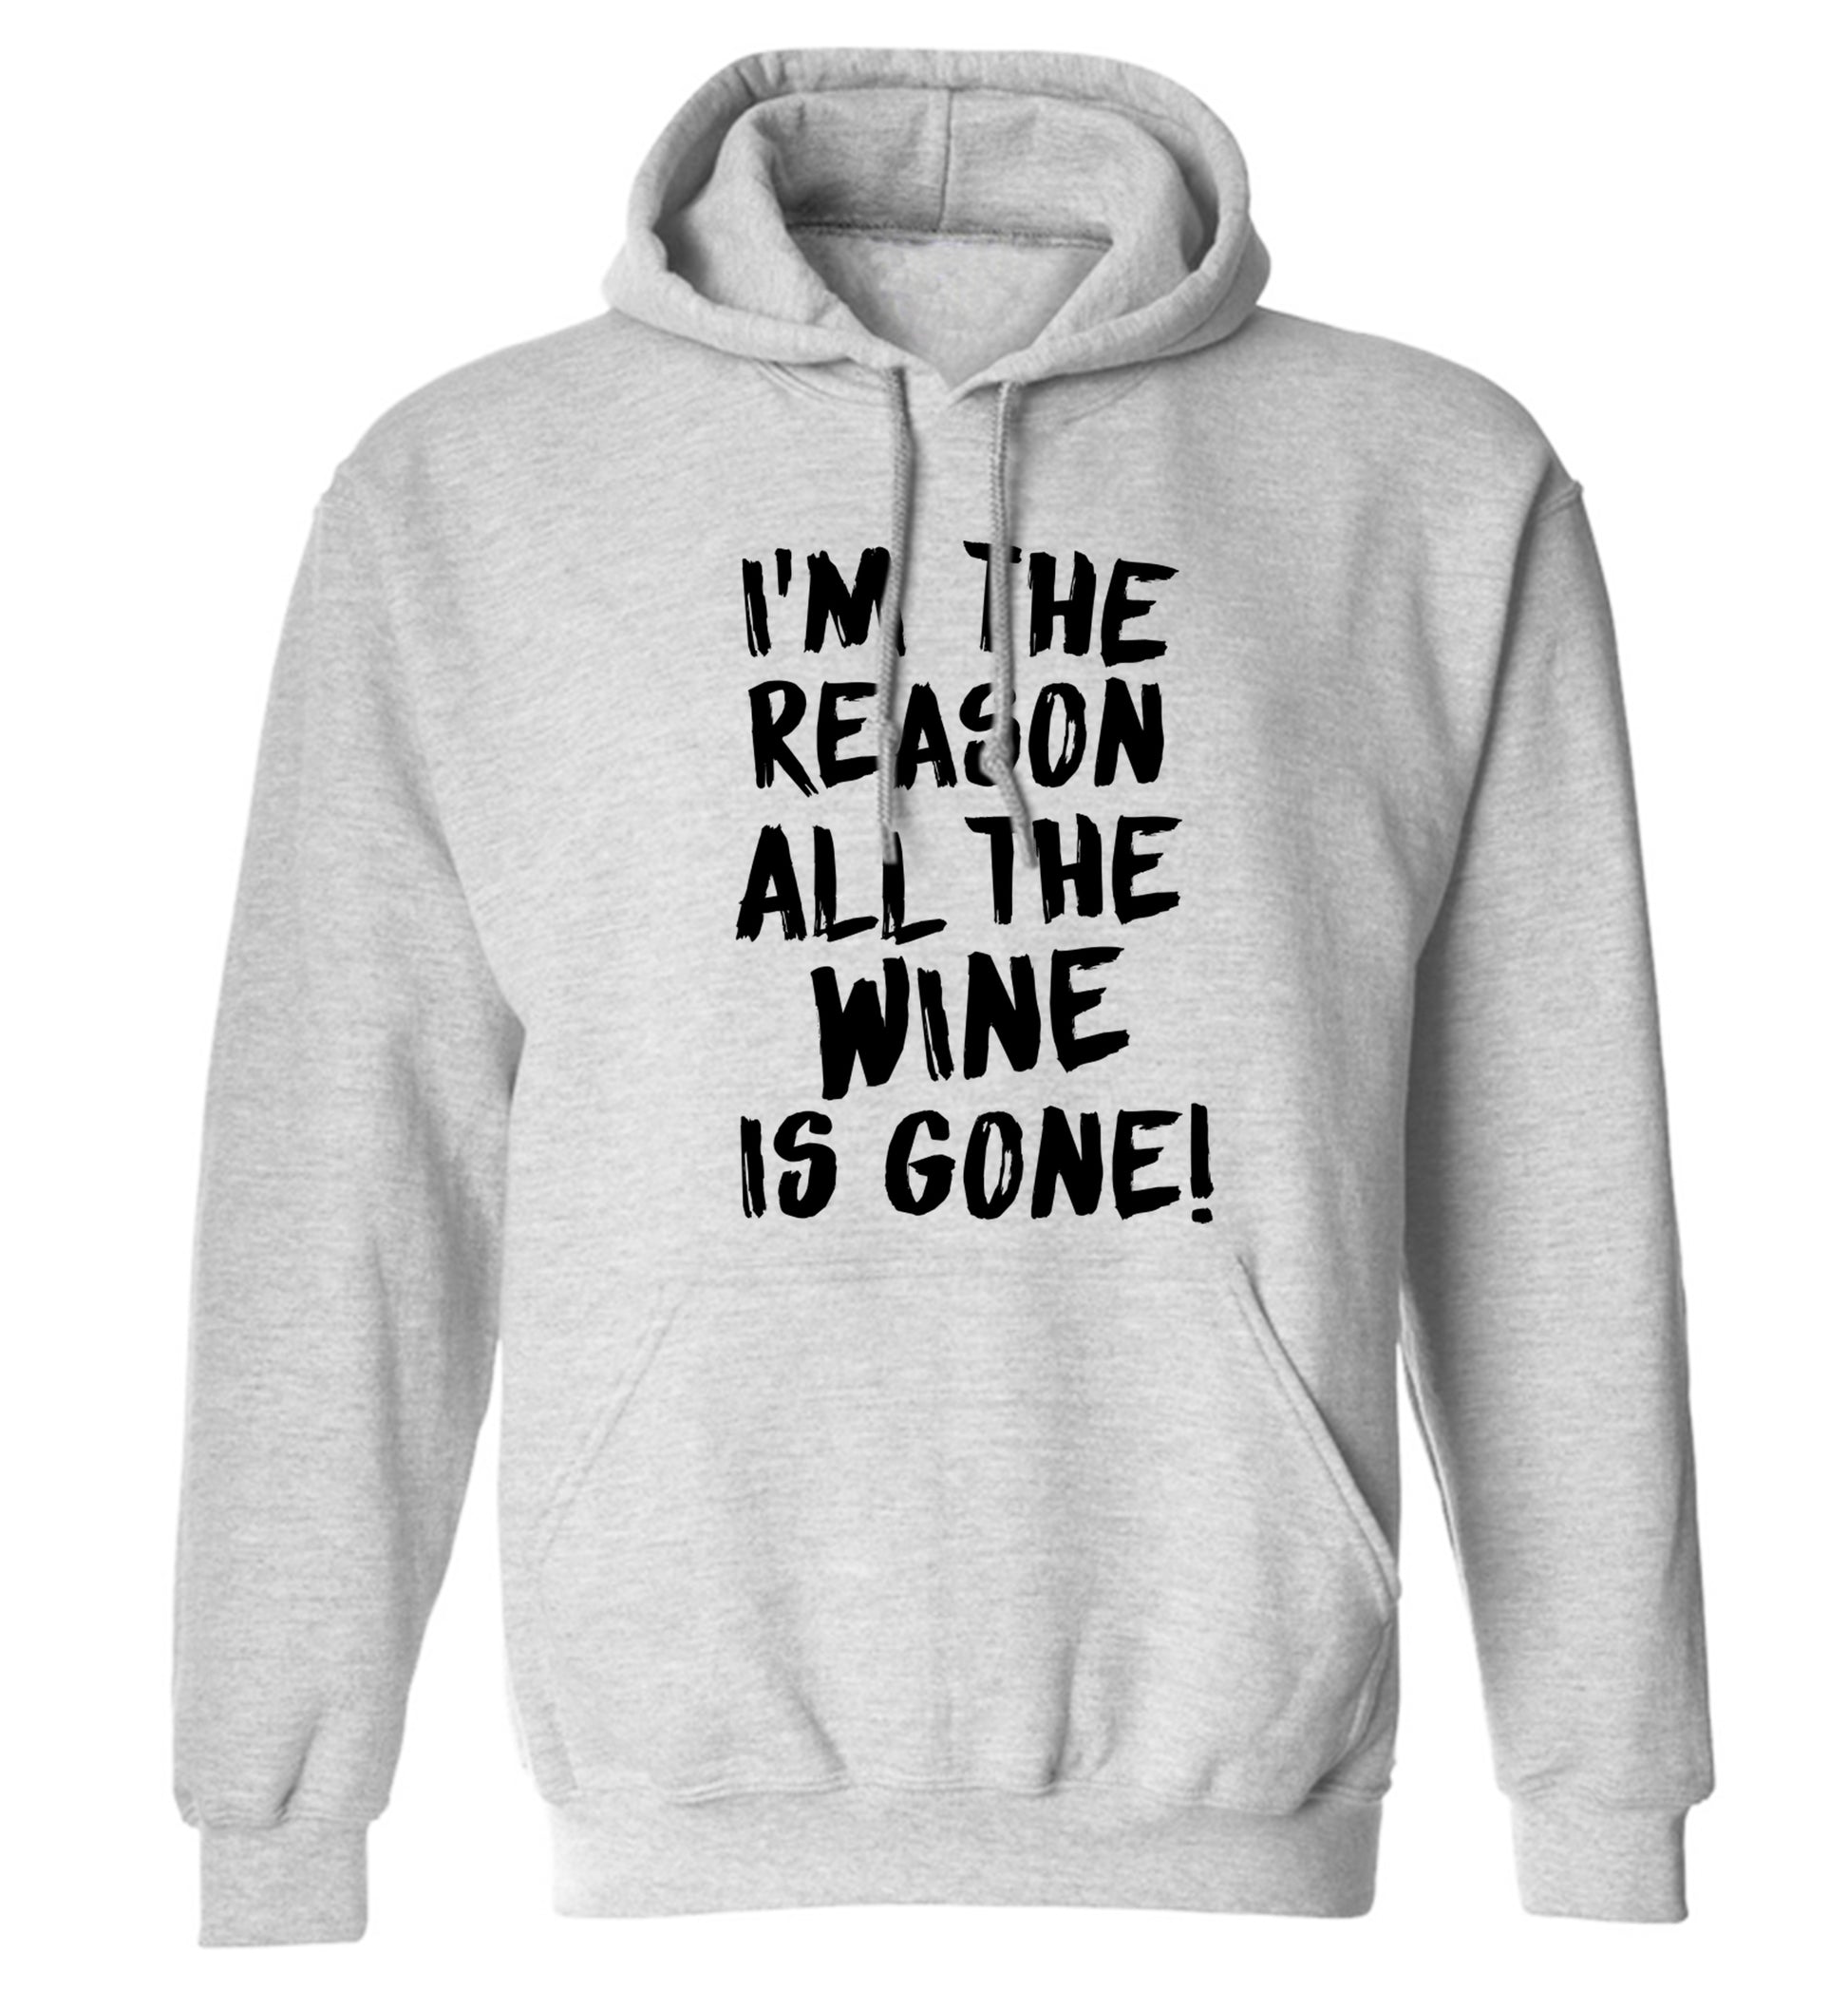 I'm the reason all the wine is gone adults unisex grey hoodie 2XL